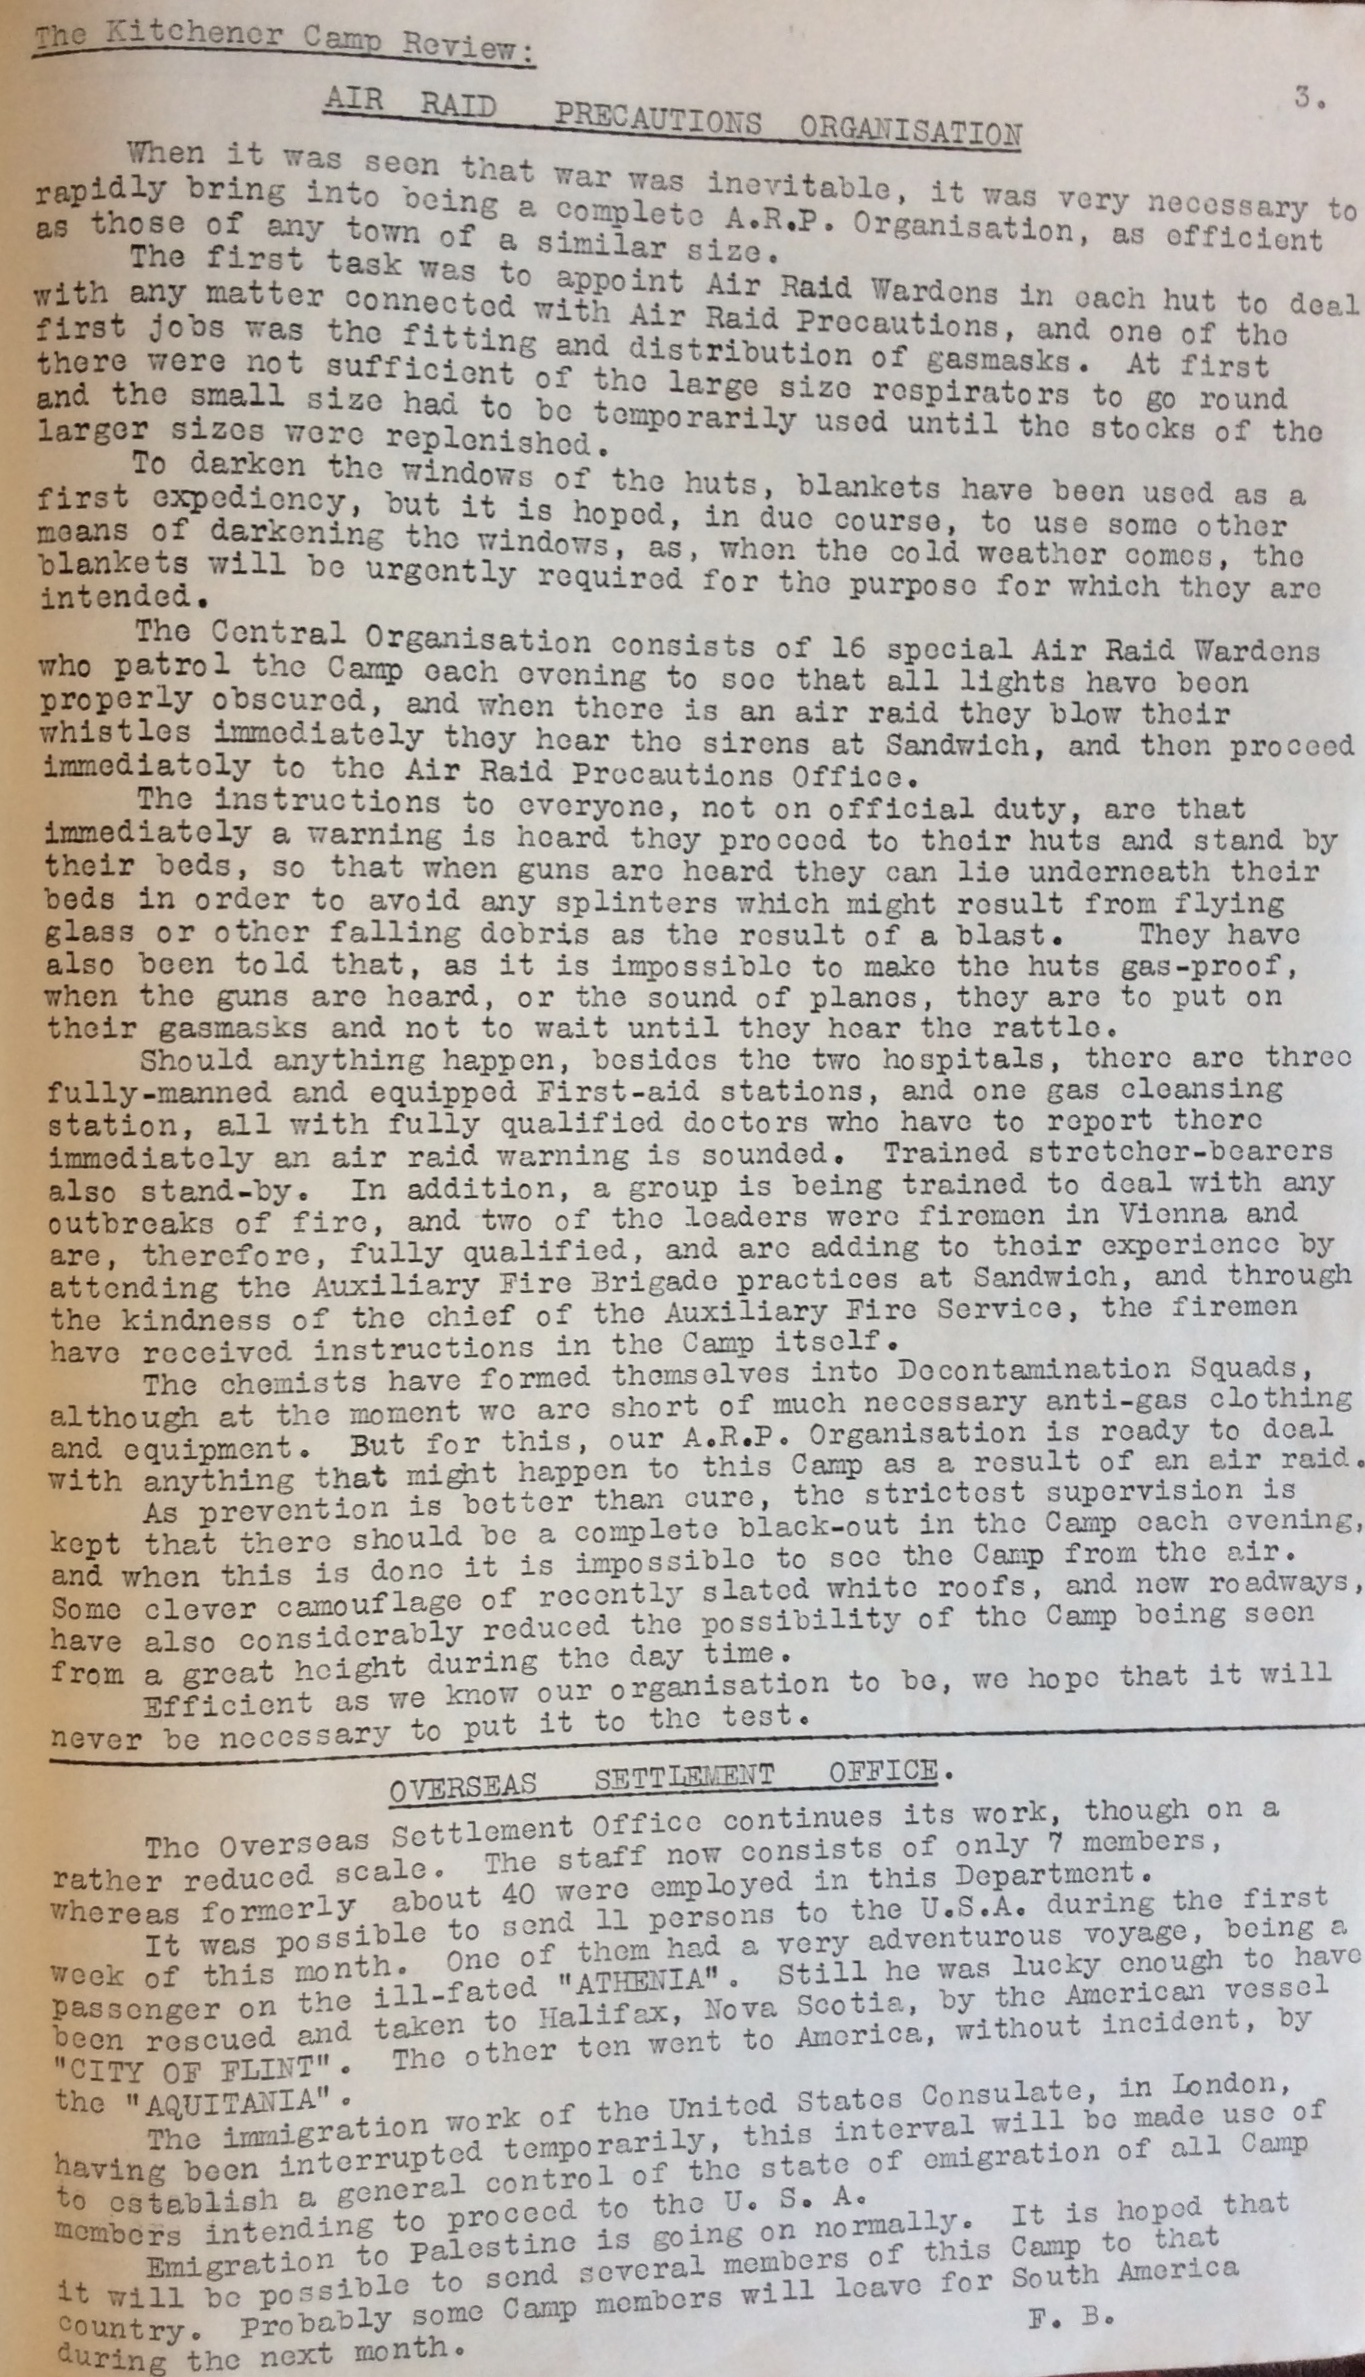 Kitchener Camp Review, October 1939, page 3